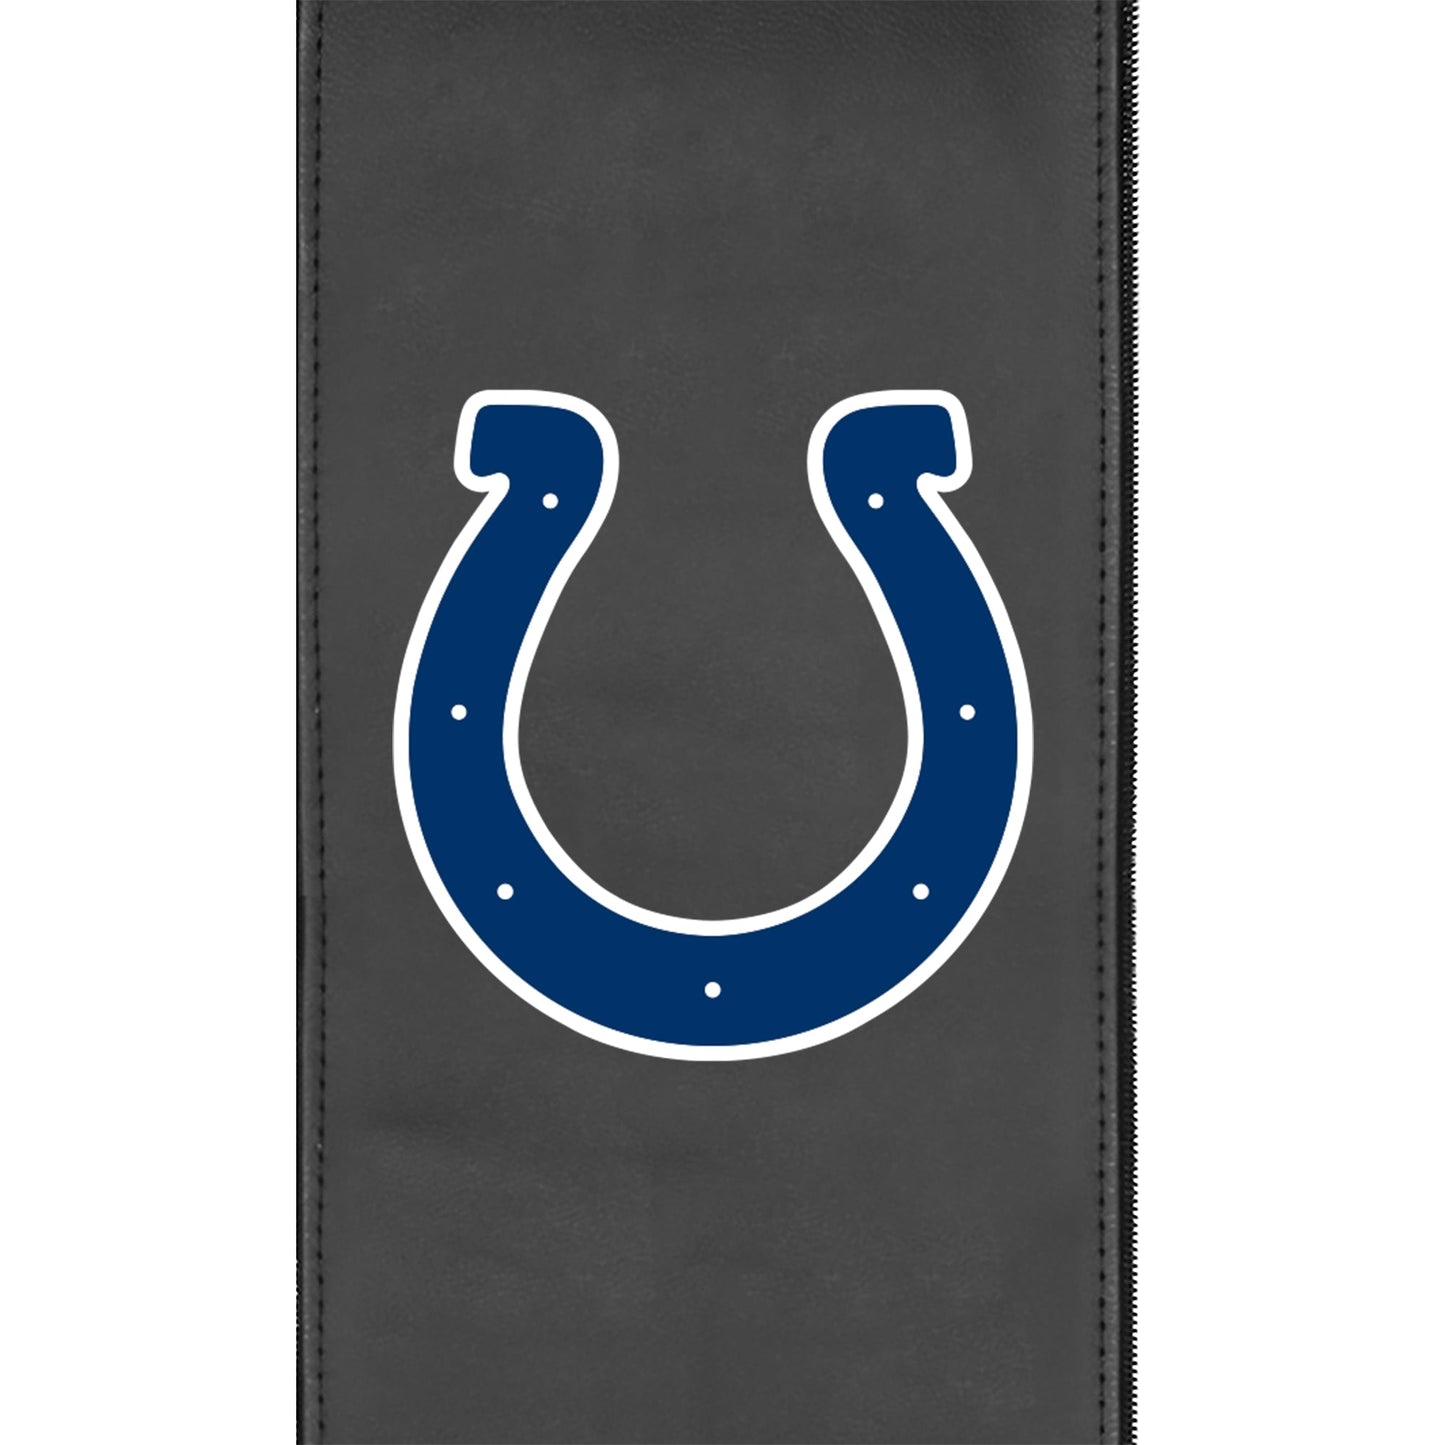 SuiteMax 3.5 VIP Seats with Indianapolis Colts Primary Logo